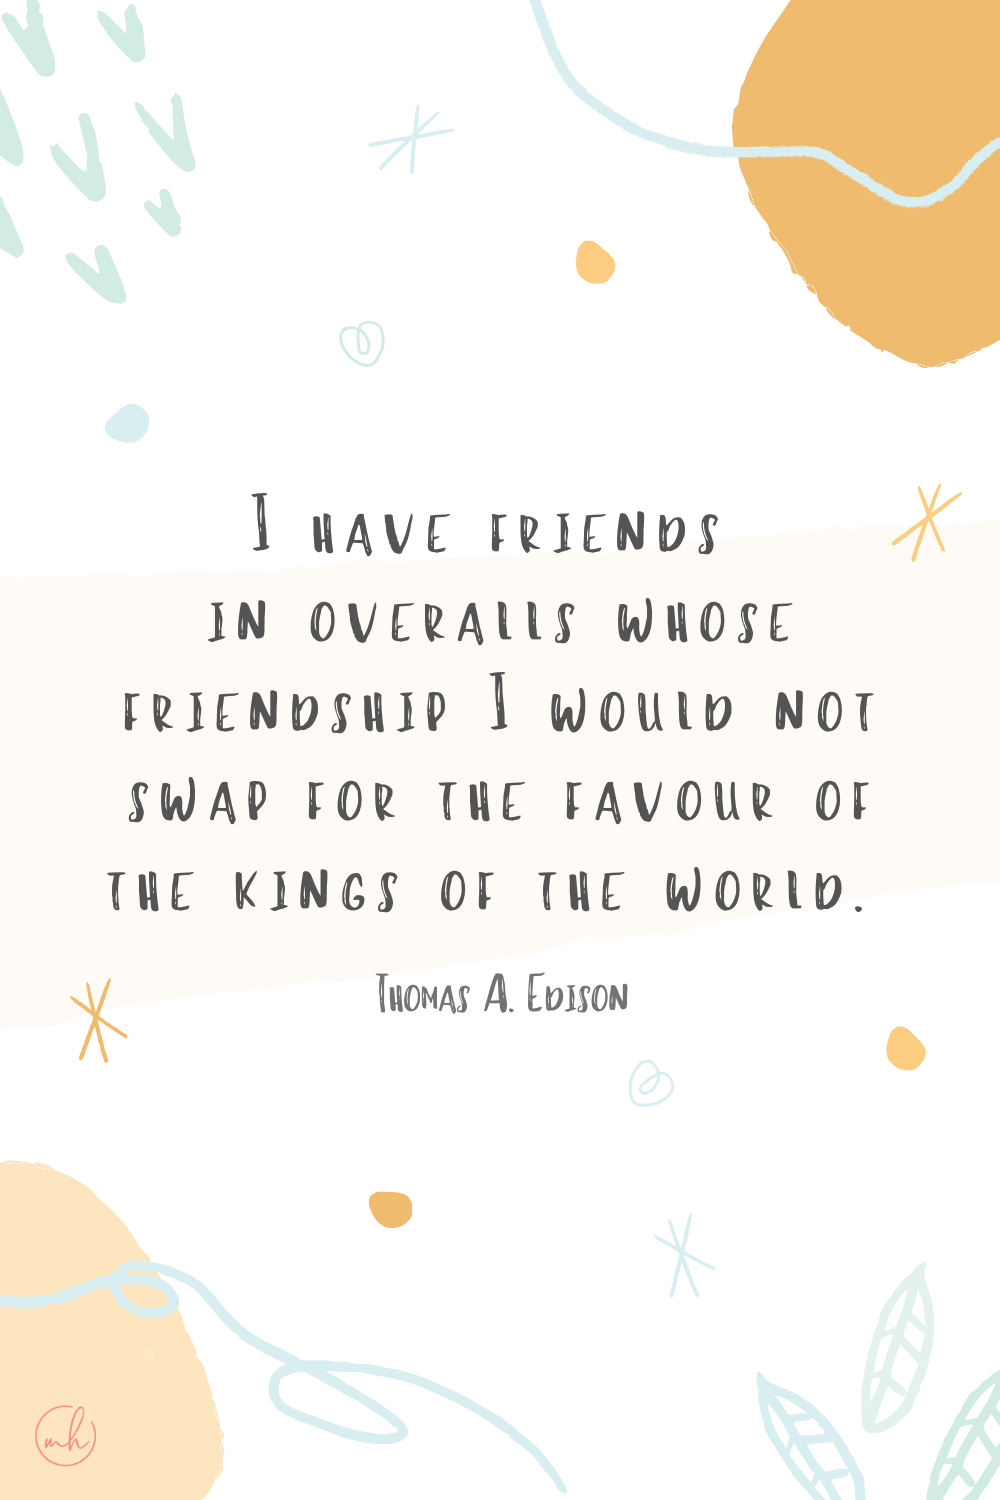 “I have friends in overalls whose friendship I would not swap for the favour of the kings of the world.” - Thomas A. Edison